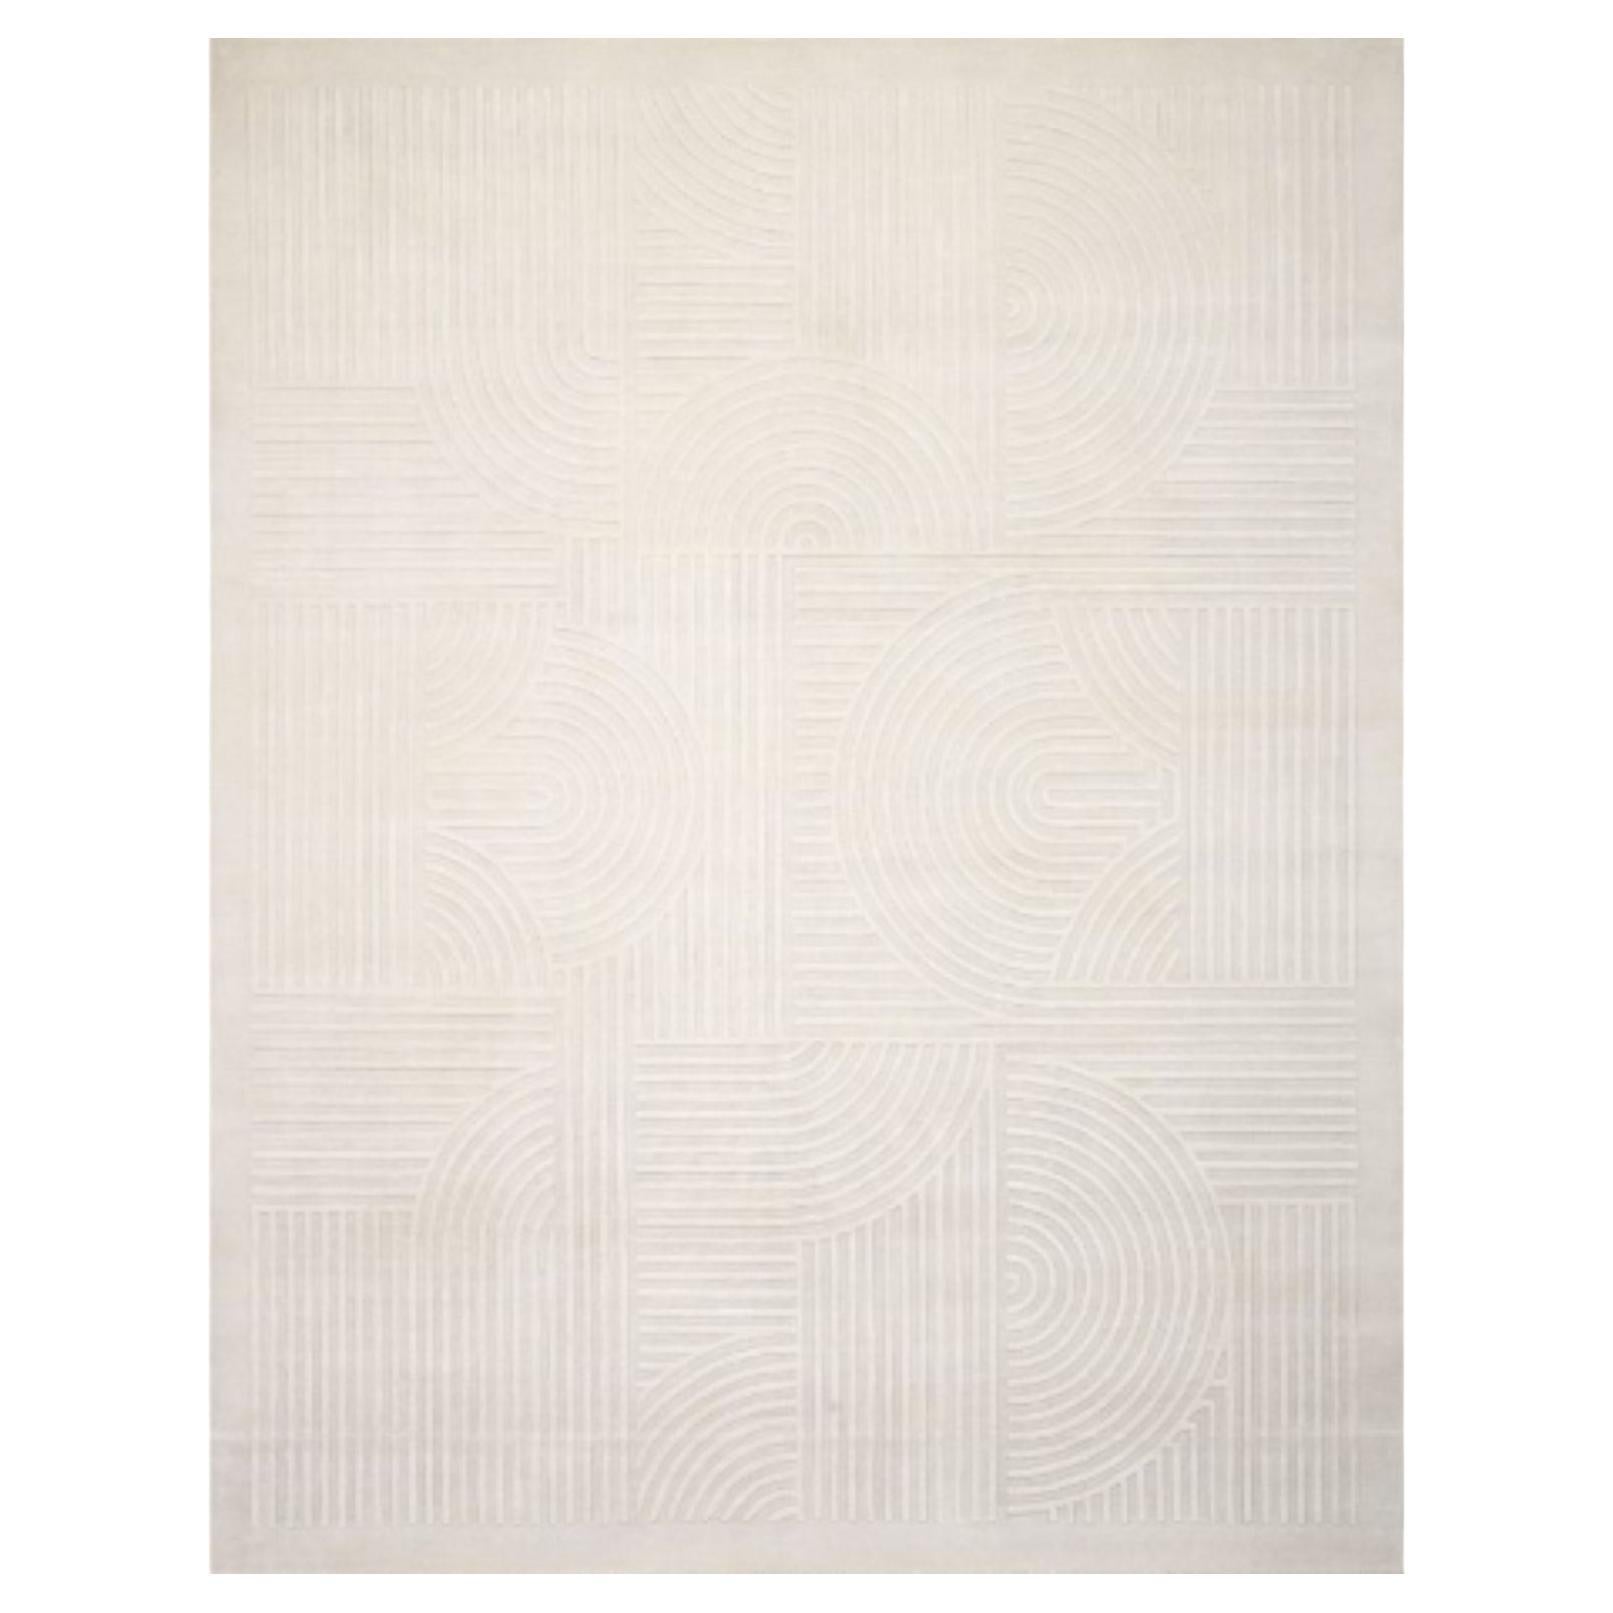 Kyoto 200 Rug by Illulian For Sale